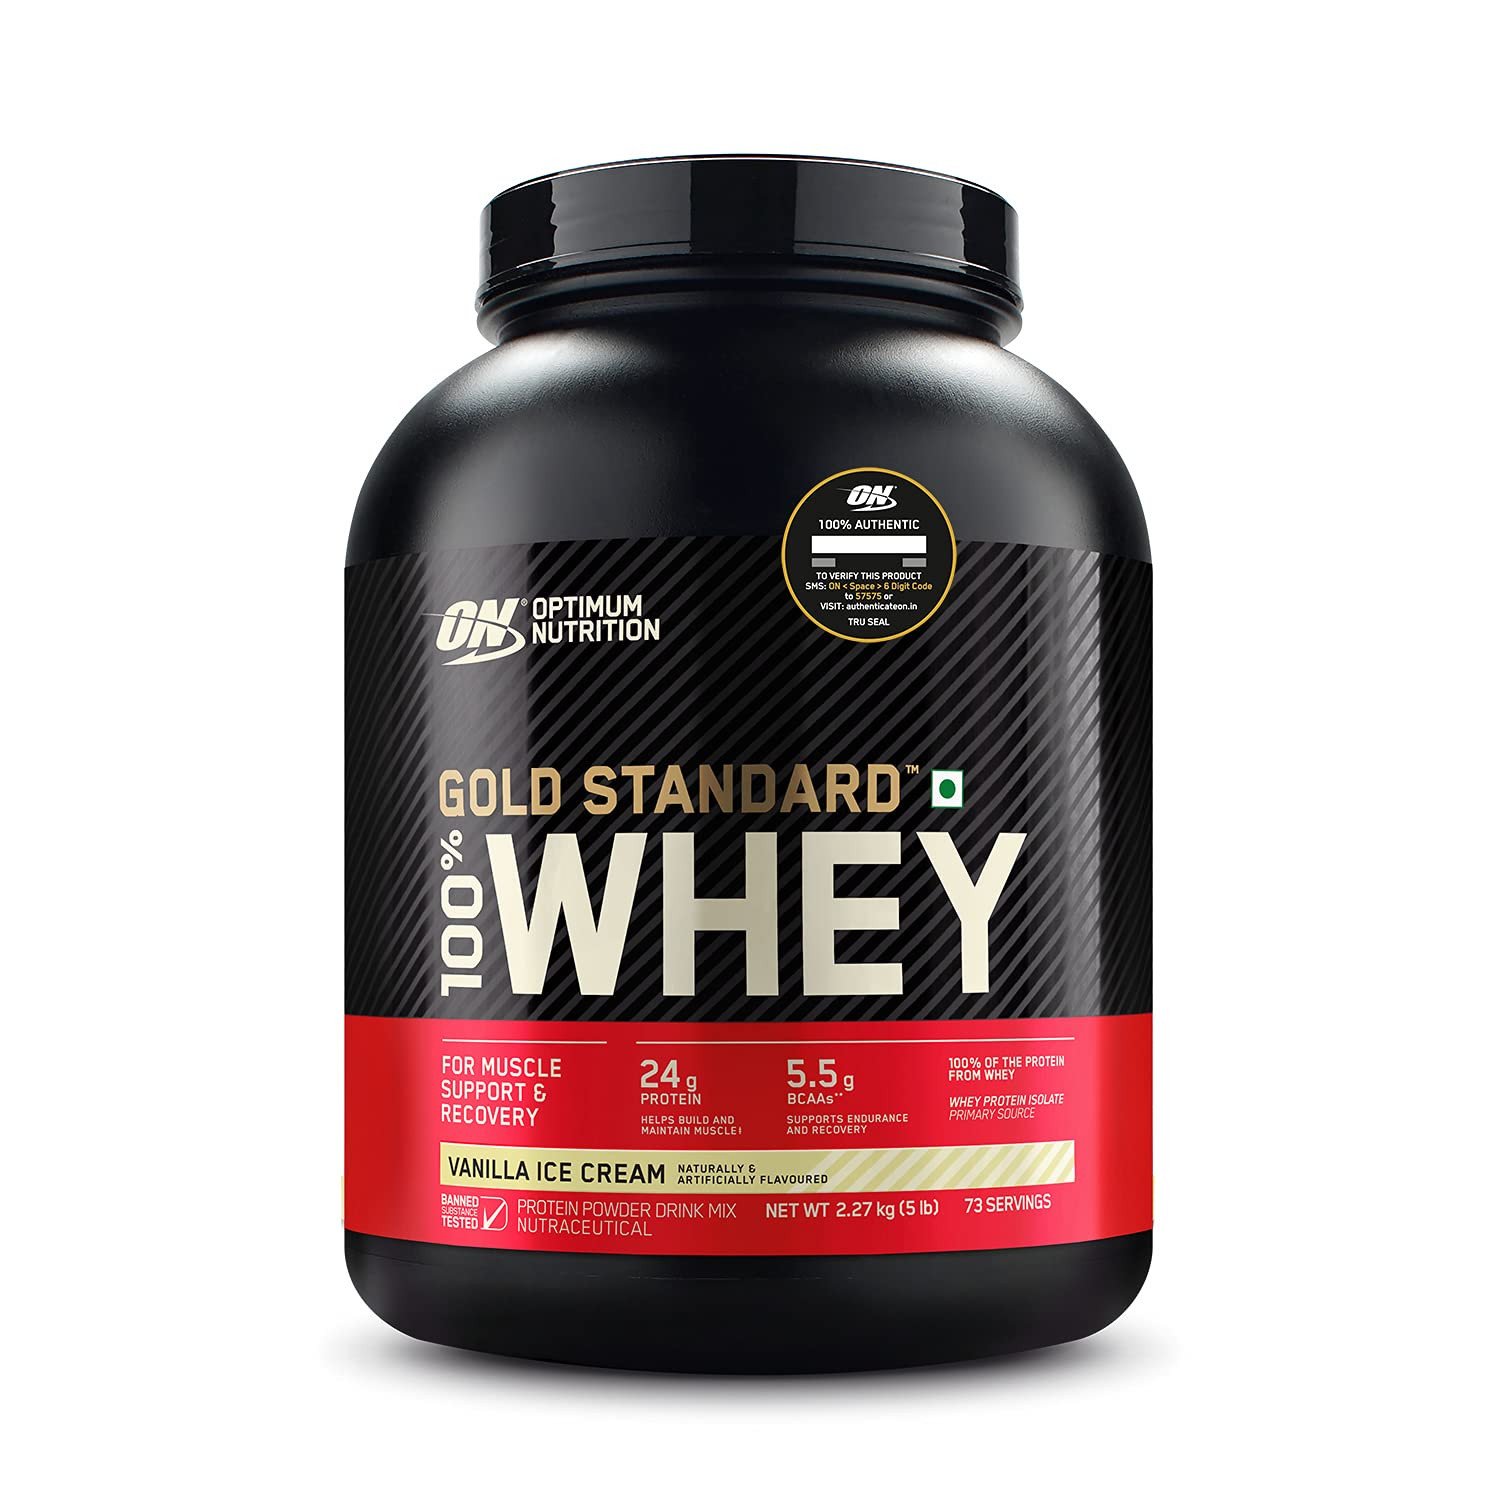 Optimum Nutrition (ON) Gold Standard 100% Whey Protein Powder (Vanilla Ice Cream)5 lbs, 2.27 kg, for Muscle Support & Recovery, Vegetarian - Primary Source Whey Isolate